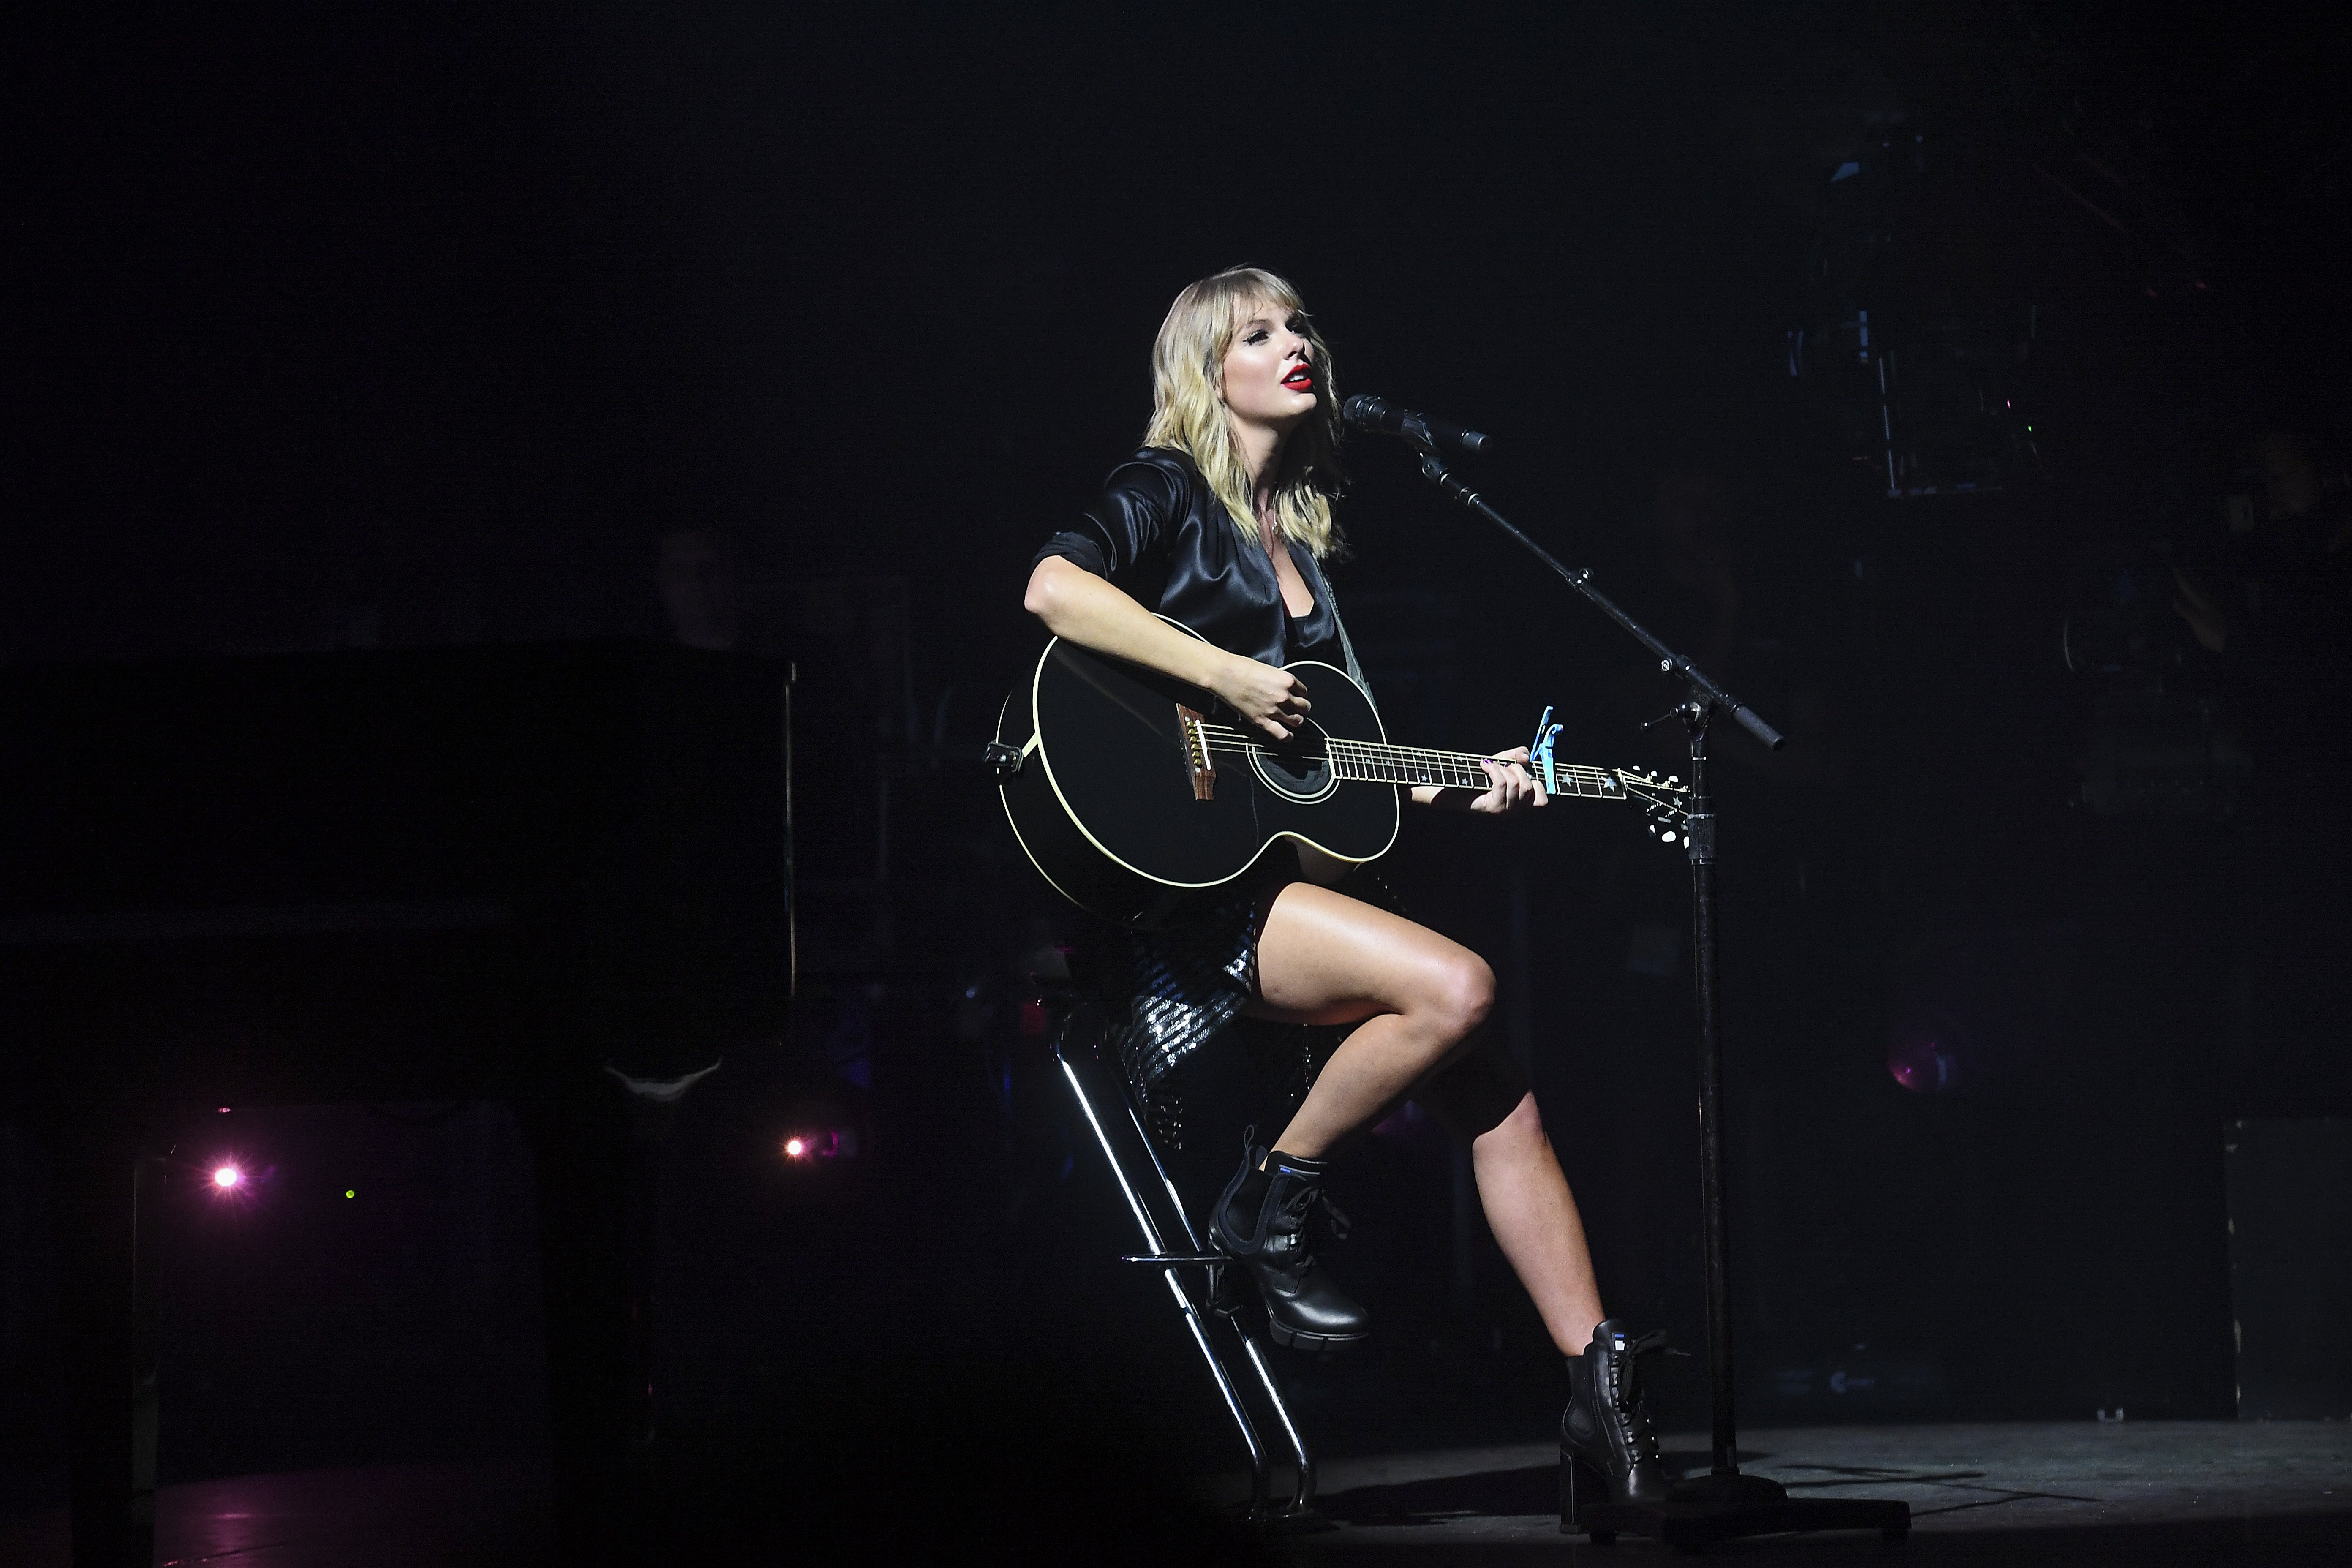 Taylor Swift performs during the "City of Lover" concert at L'Olympia on September 9, 2019, in Paris, France. | Source: Getty Images.